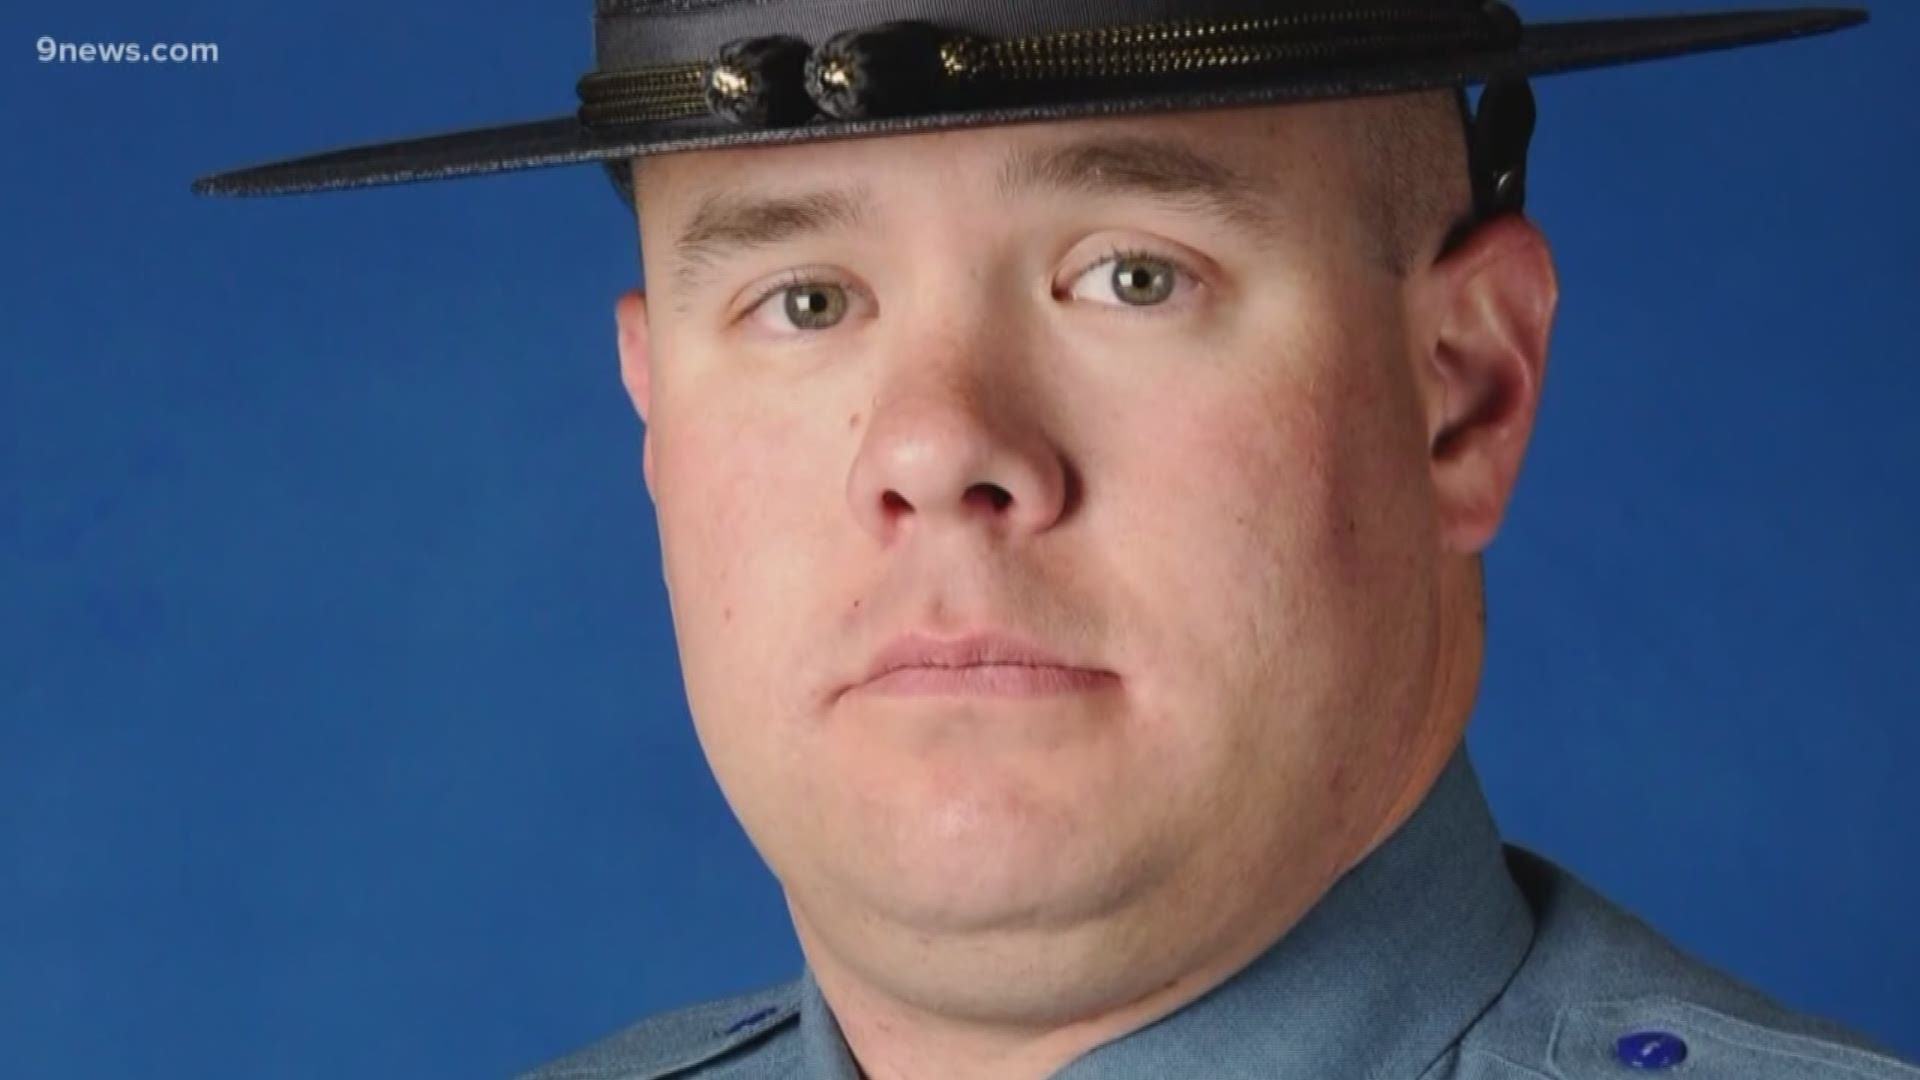 Since Colorado State Patrol Trooper William Moden’s death, many have shared stories have about his passion for law enforcement and his involvement in the community. One example is how he impacted kids with UCHealth’s P.A.R.T.Y. Program. Trooper Moden was involved in the program since he became a part of CSP’s Vehicular Homicide Unit three years ago.